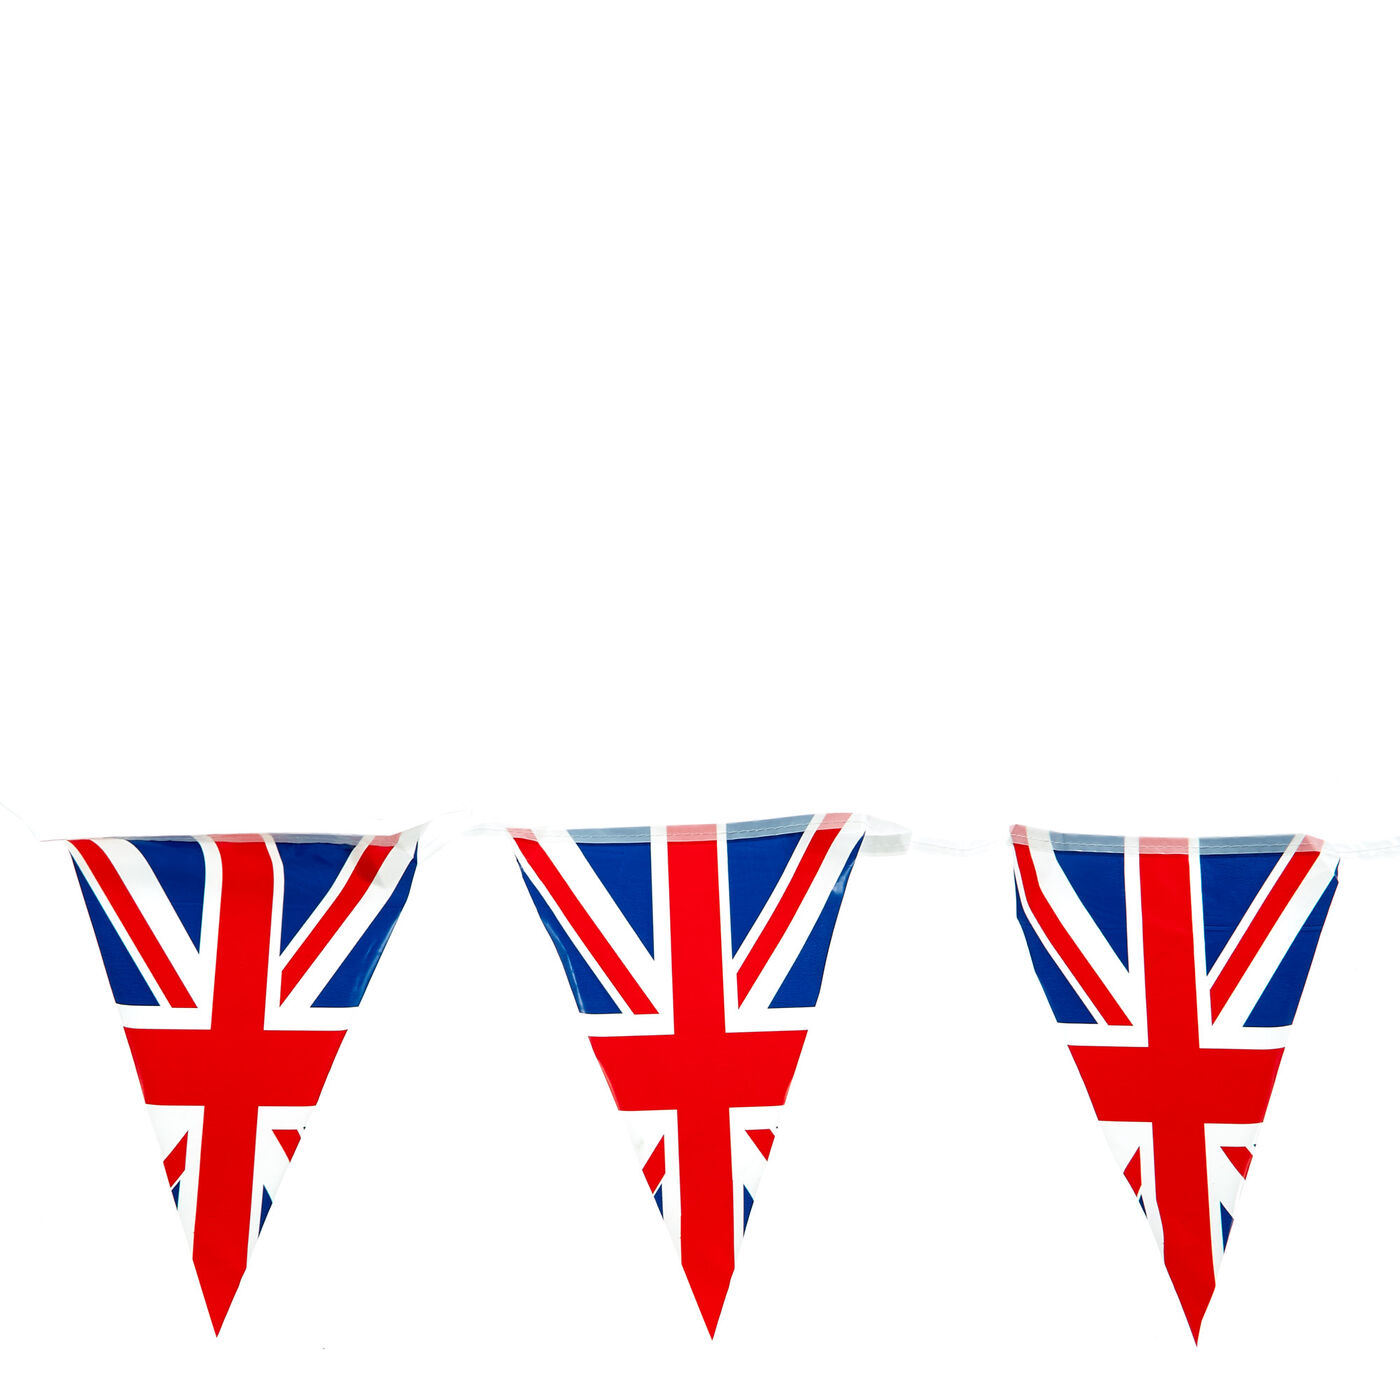 Buy 3.6m Union Jack Bunting for GBP 1.99